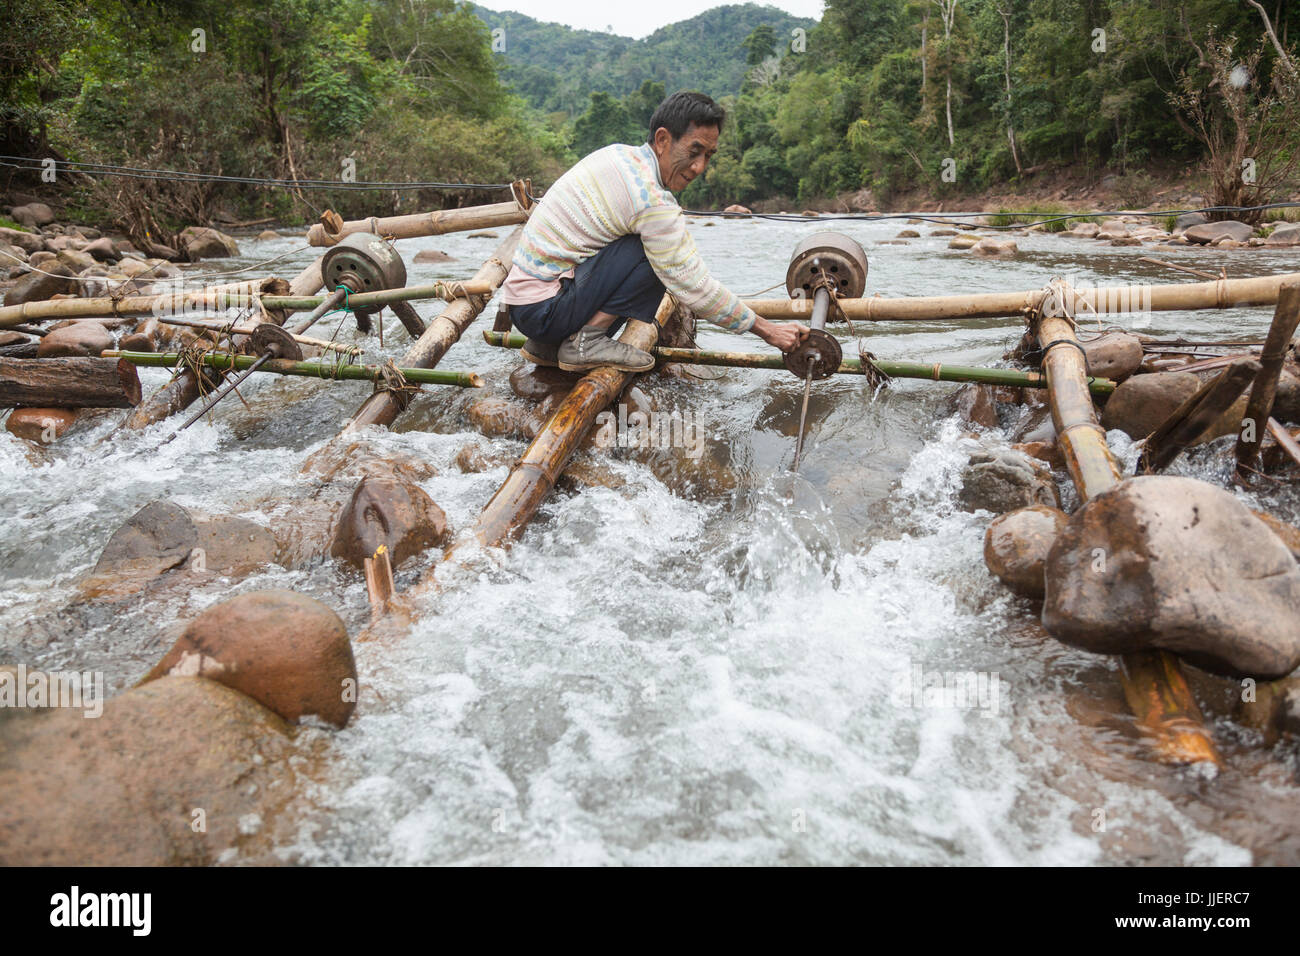 A man adjusts the (boat) propeller on a micro hydro turbine in the flow of the Nam Ou River at Ban Sop Kha, Laos. The turbines are used by villages all along the river to generate electricity, at least during the dry season when the water level is low enough to mount them to the river bed. Stock Photo